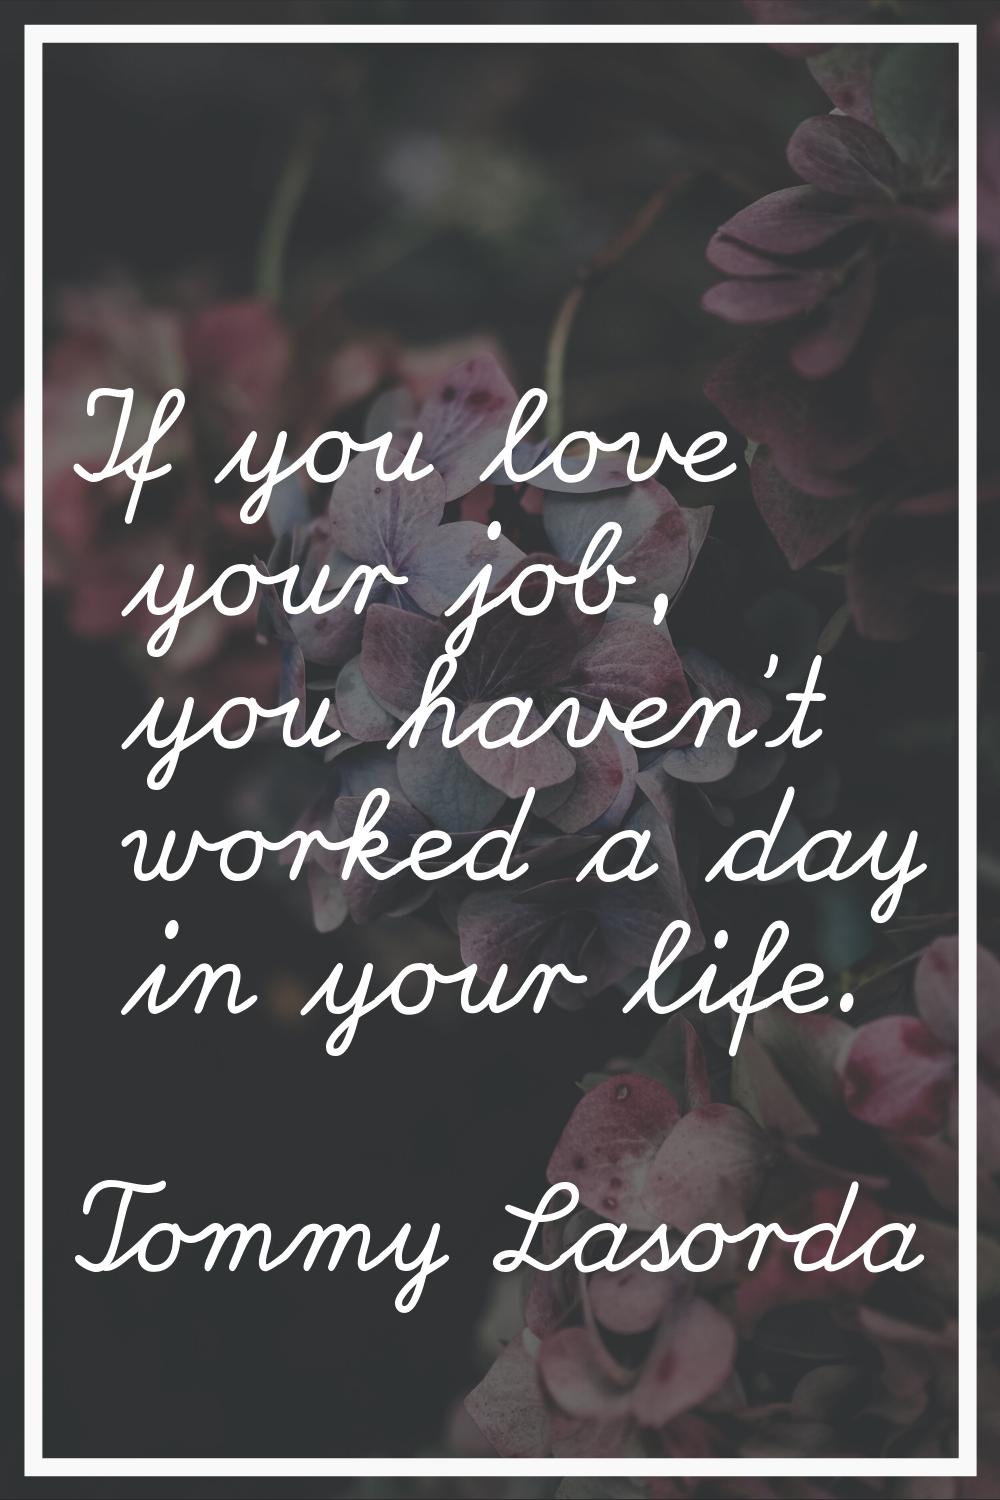 If you love your job, you haven't worked a day in your life.